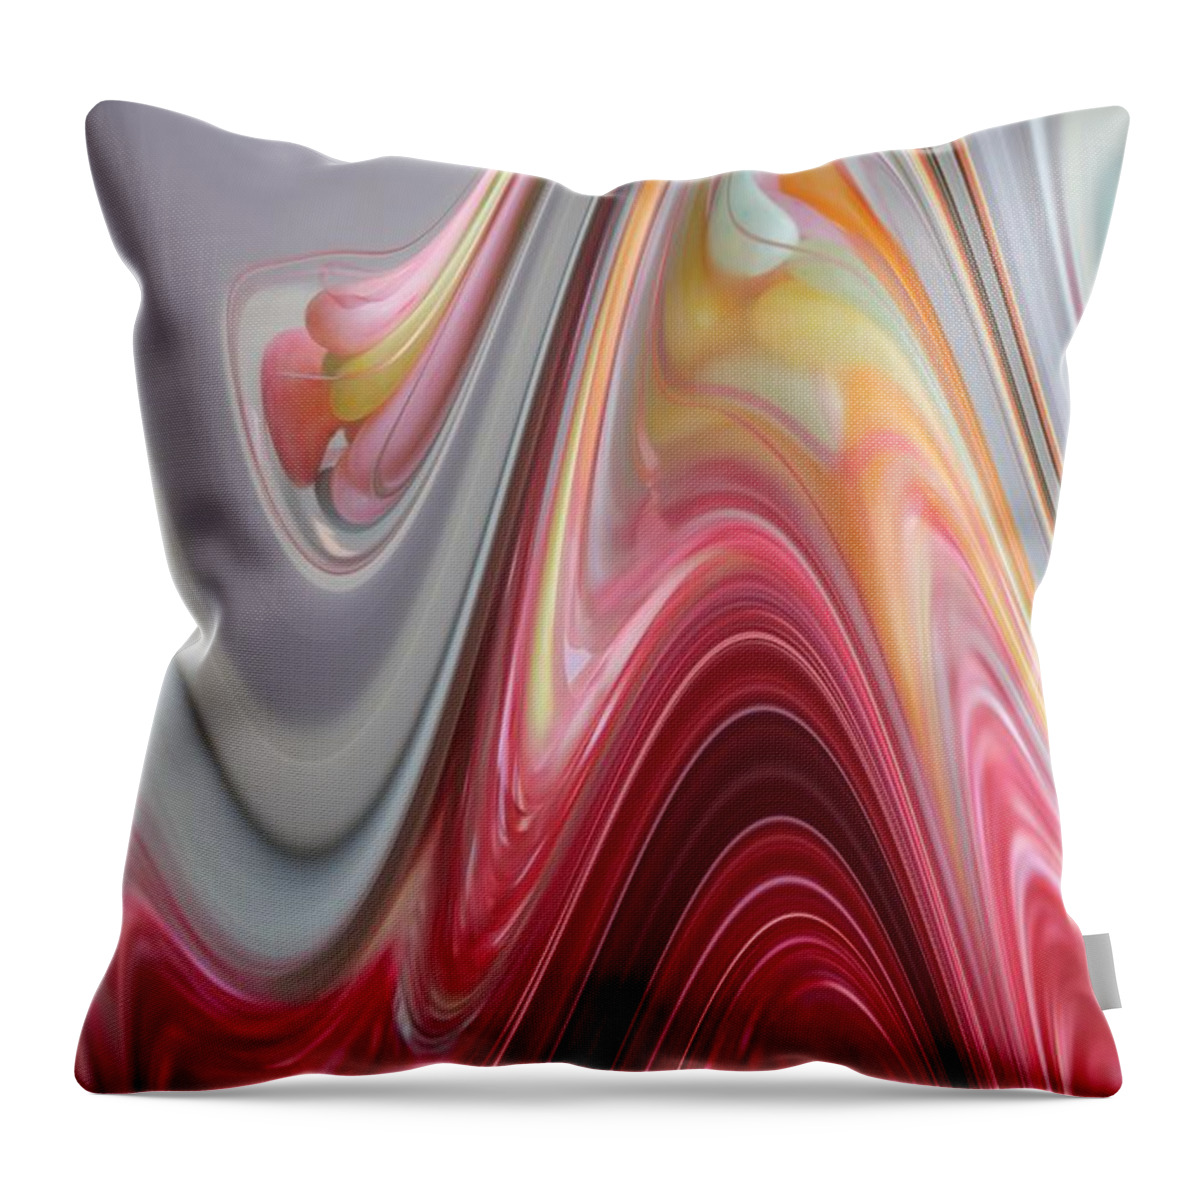 Abstract Throw Pillow featuring the digital art Marble by Alice Terrill